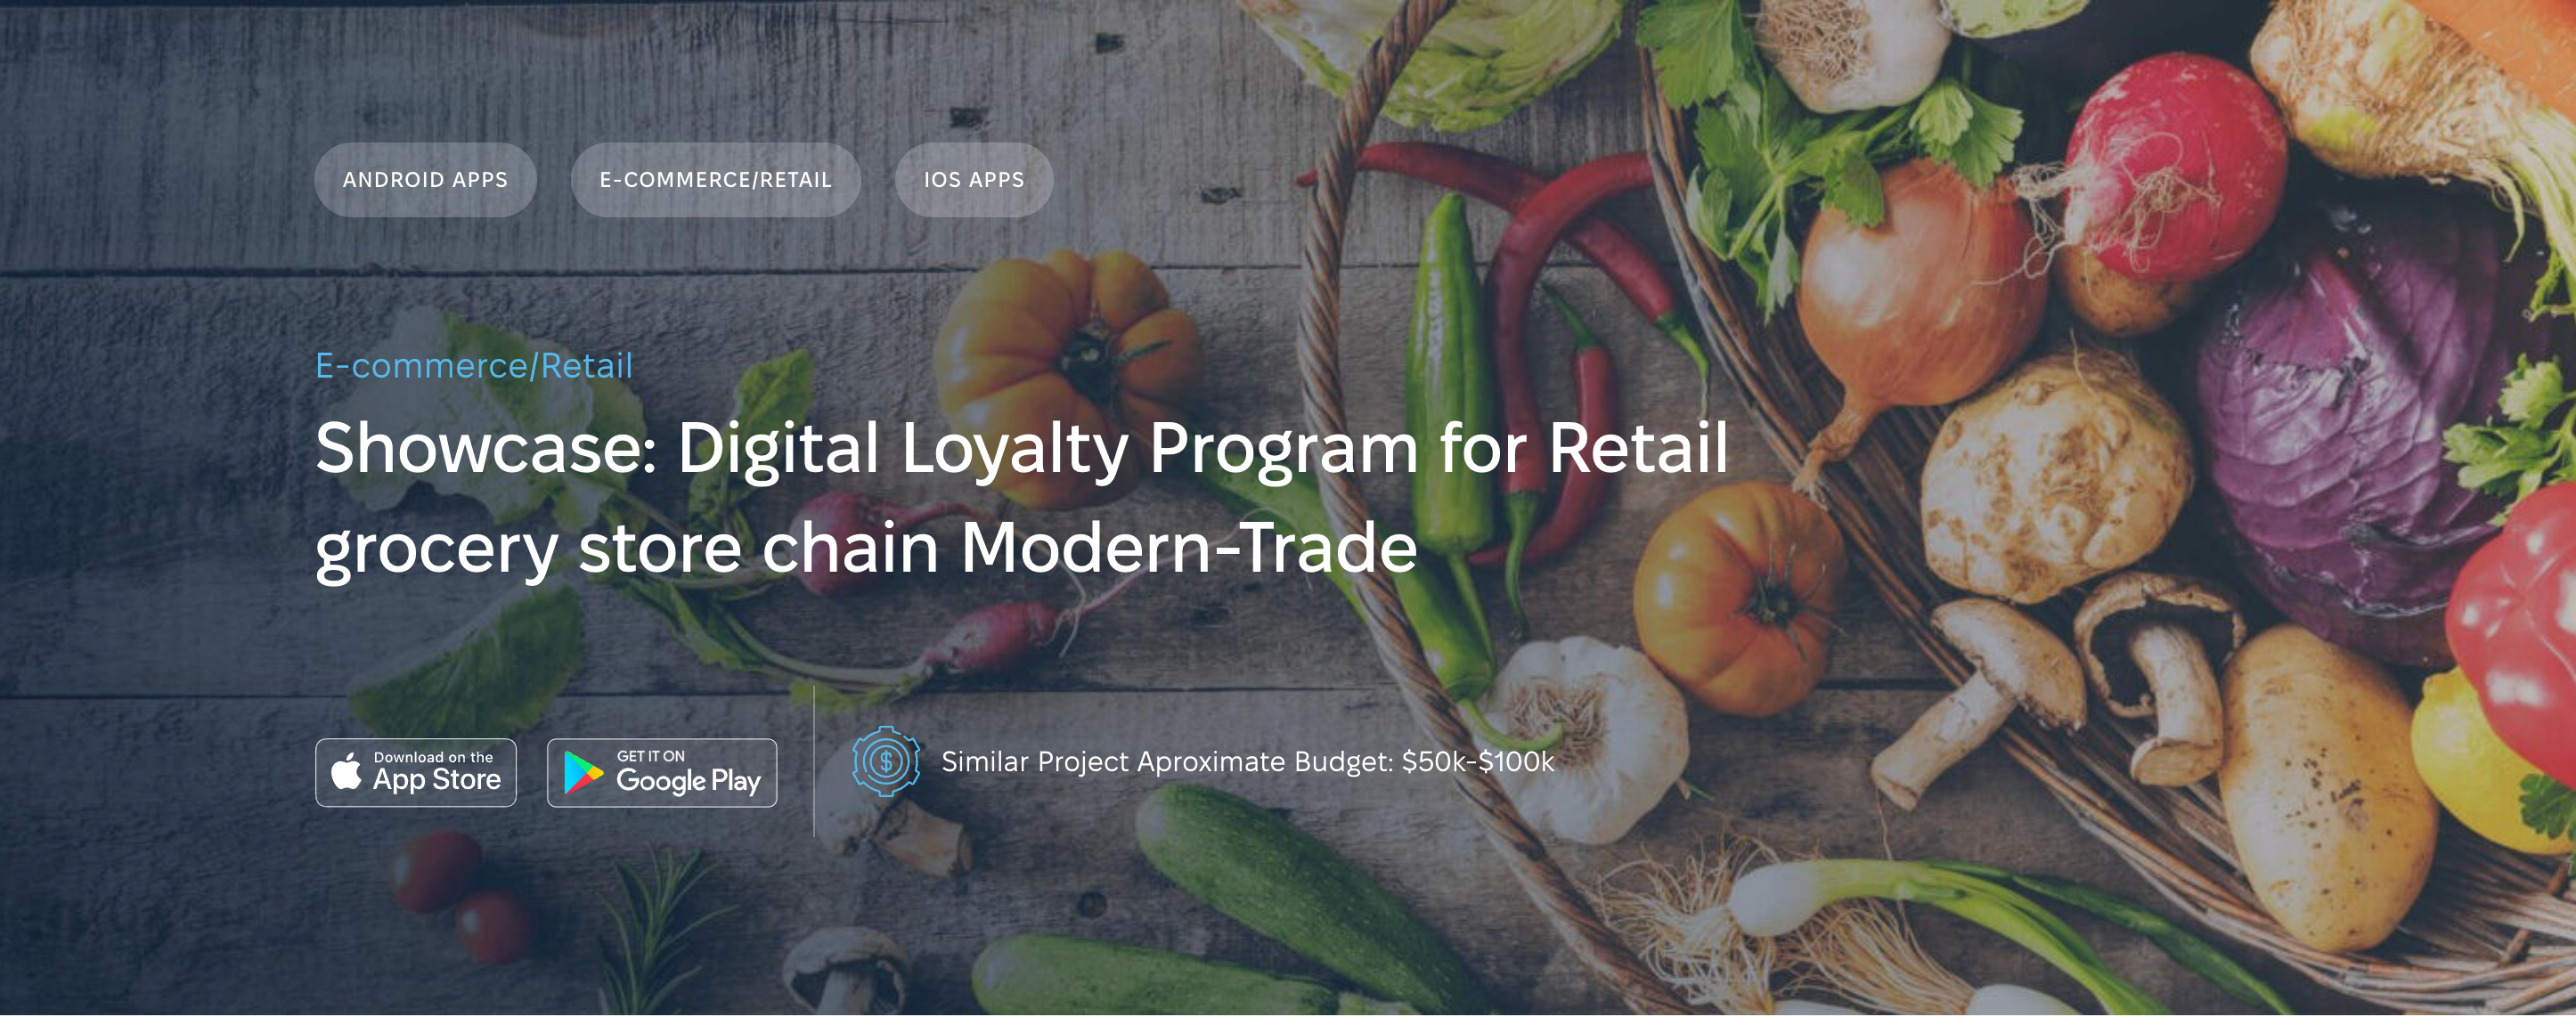 Digital Loyalty Program for Retail by Attract Group